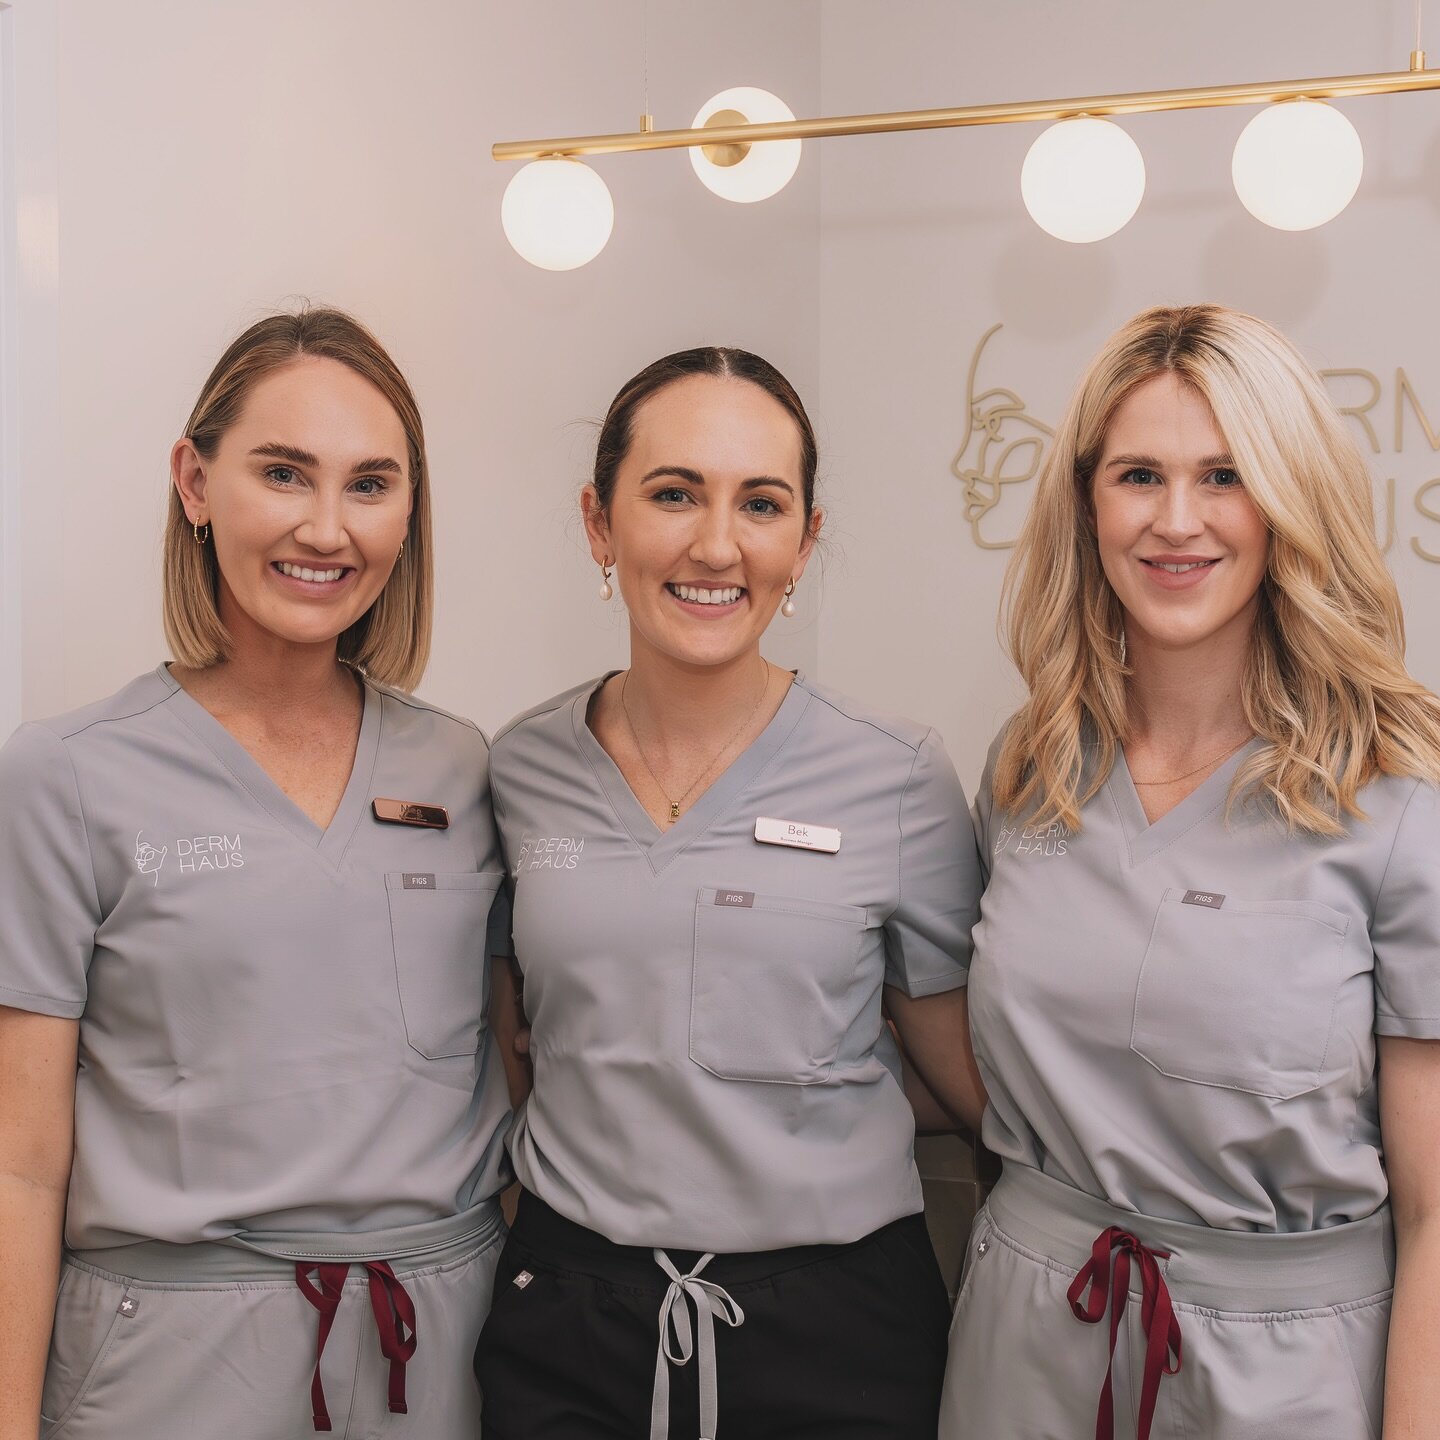 A message from Meg, Bek &amp; Lori:

This year has been a monumental one for Derm Haus marked by some big milestones for our little family business including: 

🌟 The grand opening of our Bald Hills clinic
🌟 Our team growing twofold
🌟 The expansio